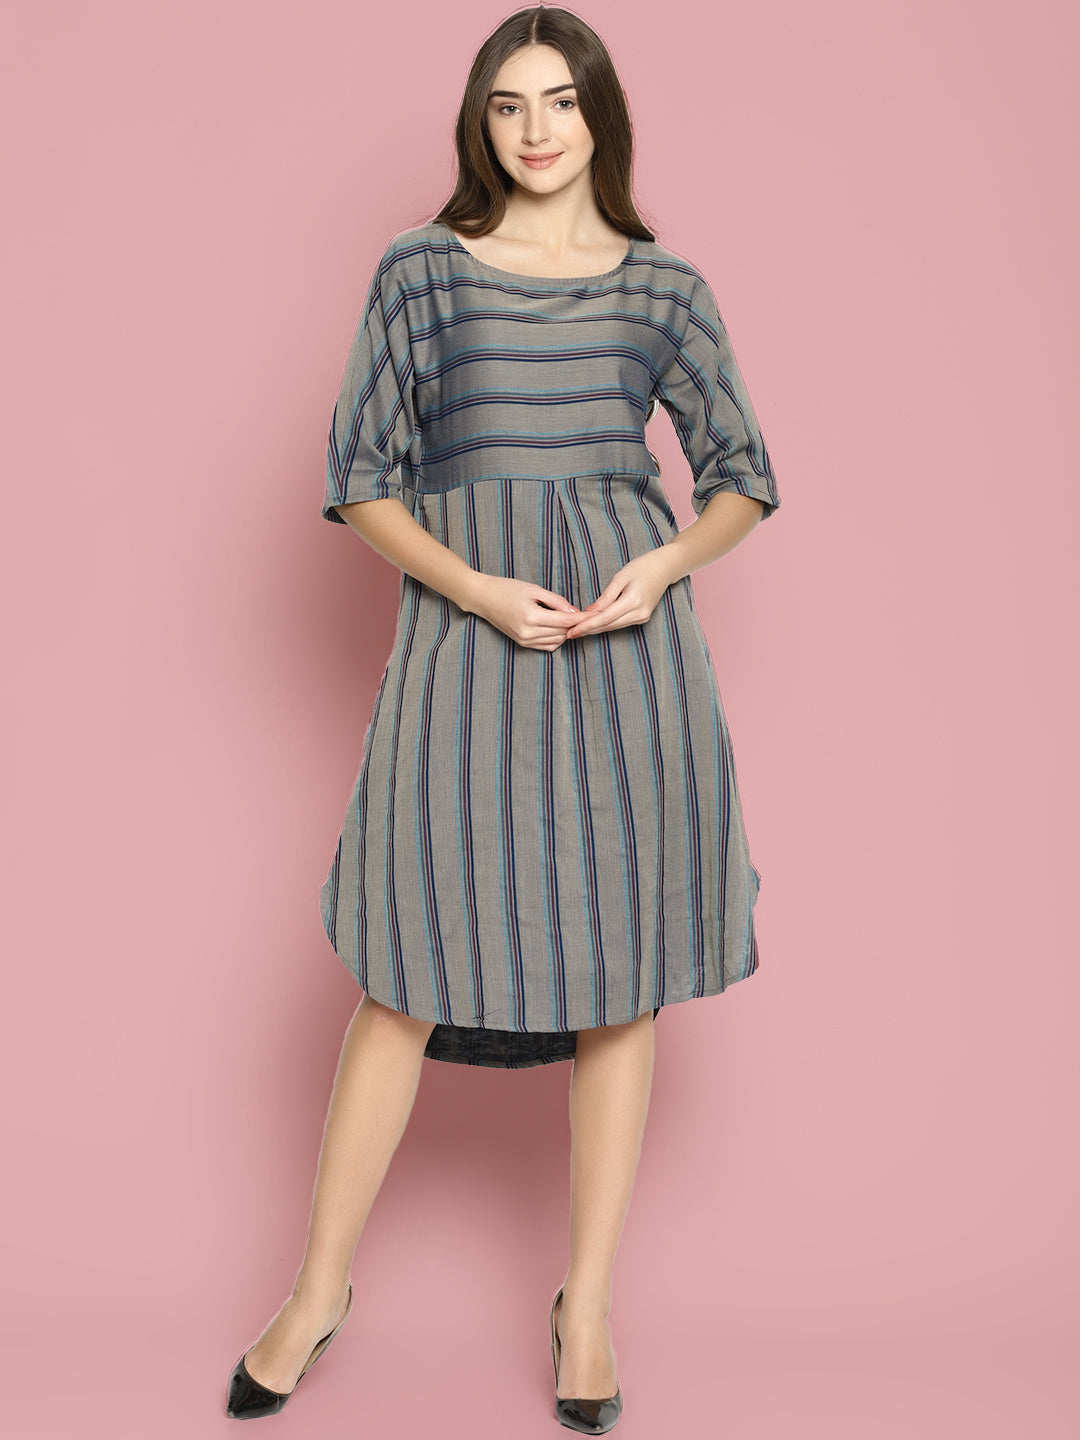 Grey Striped Dress With Curved Hemline | Untung